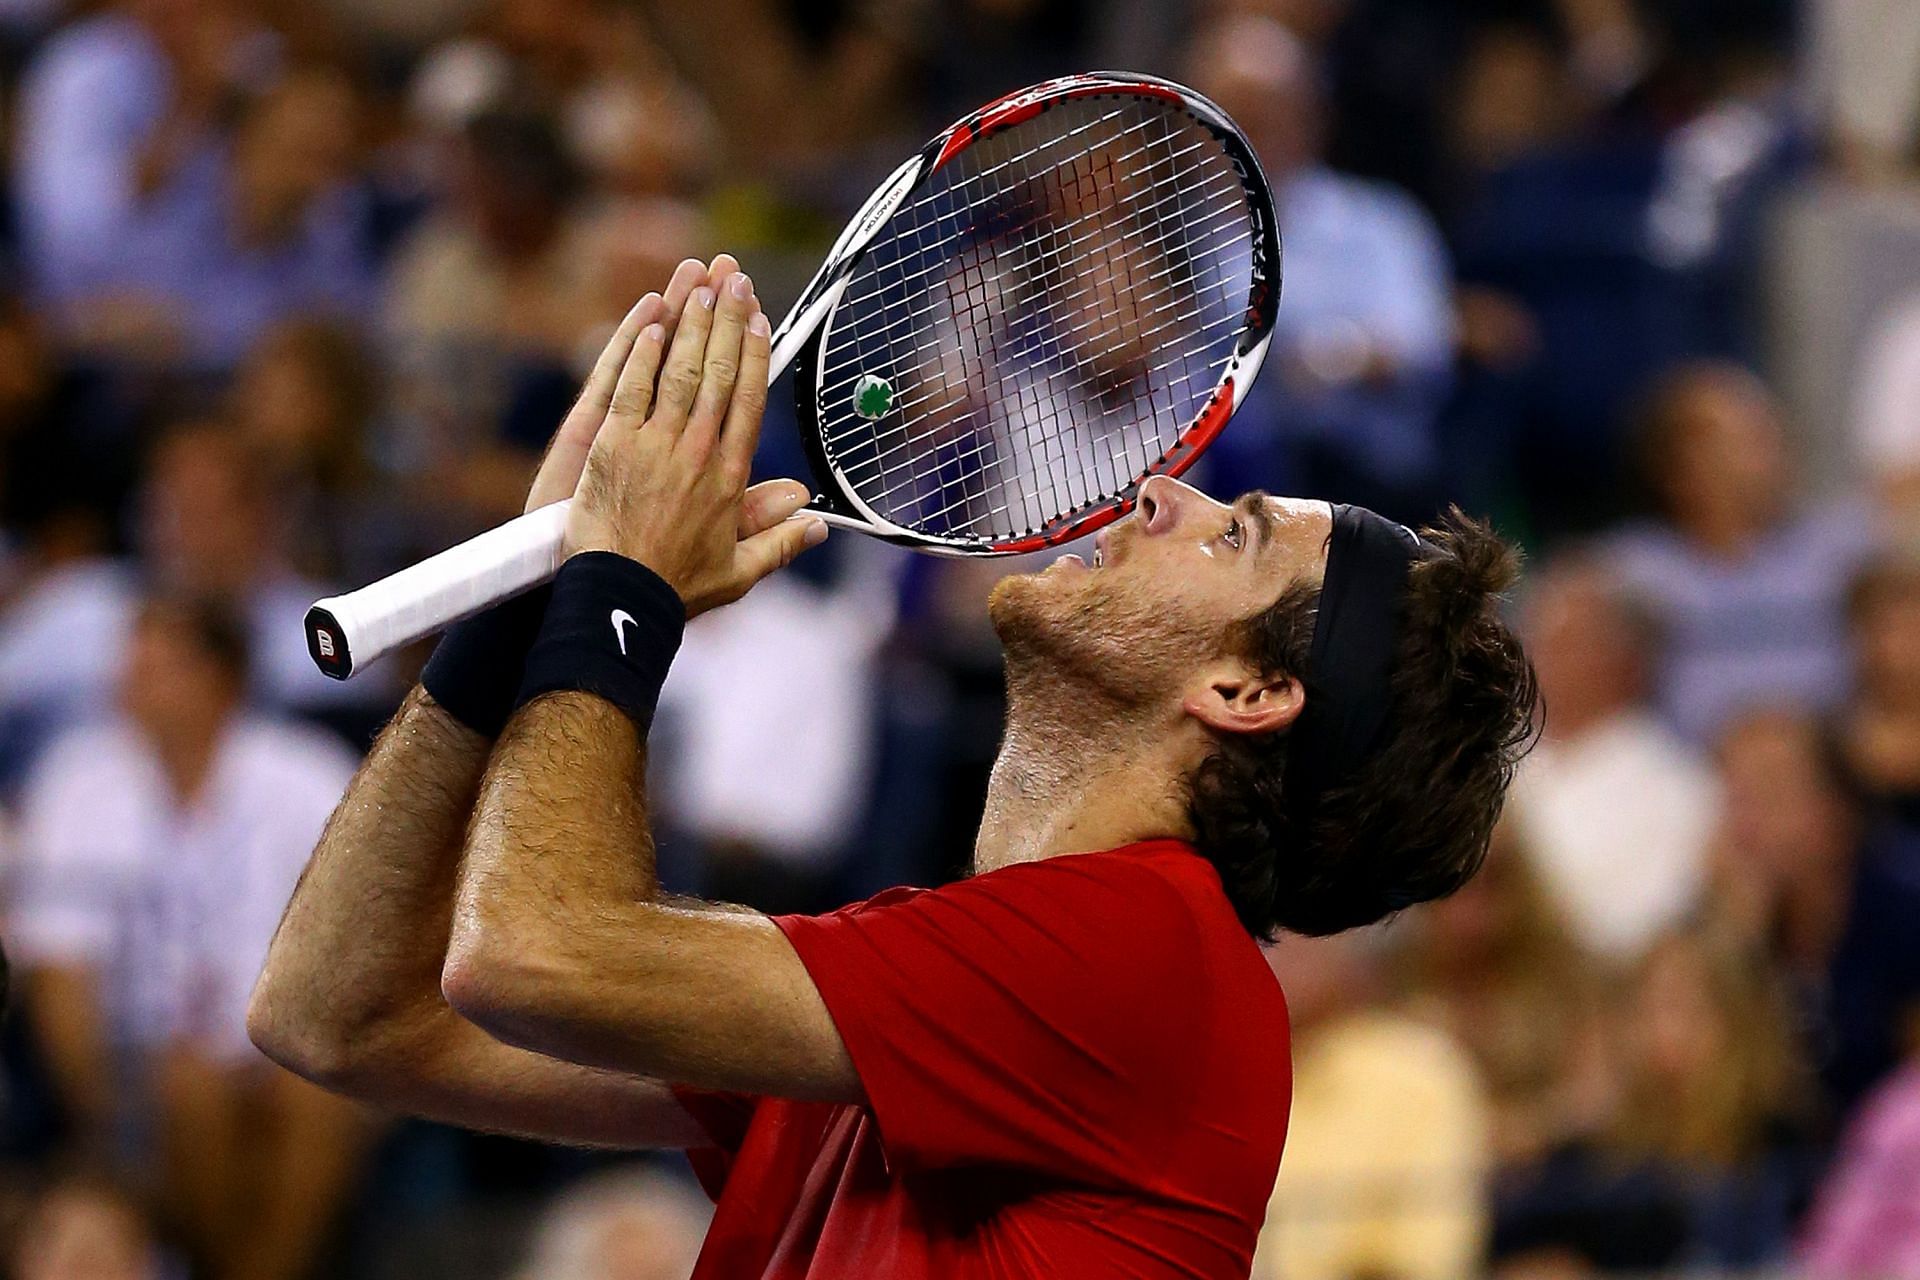 Del Potro made a return to the top of the sport in 2012